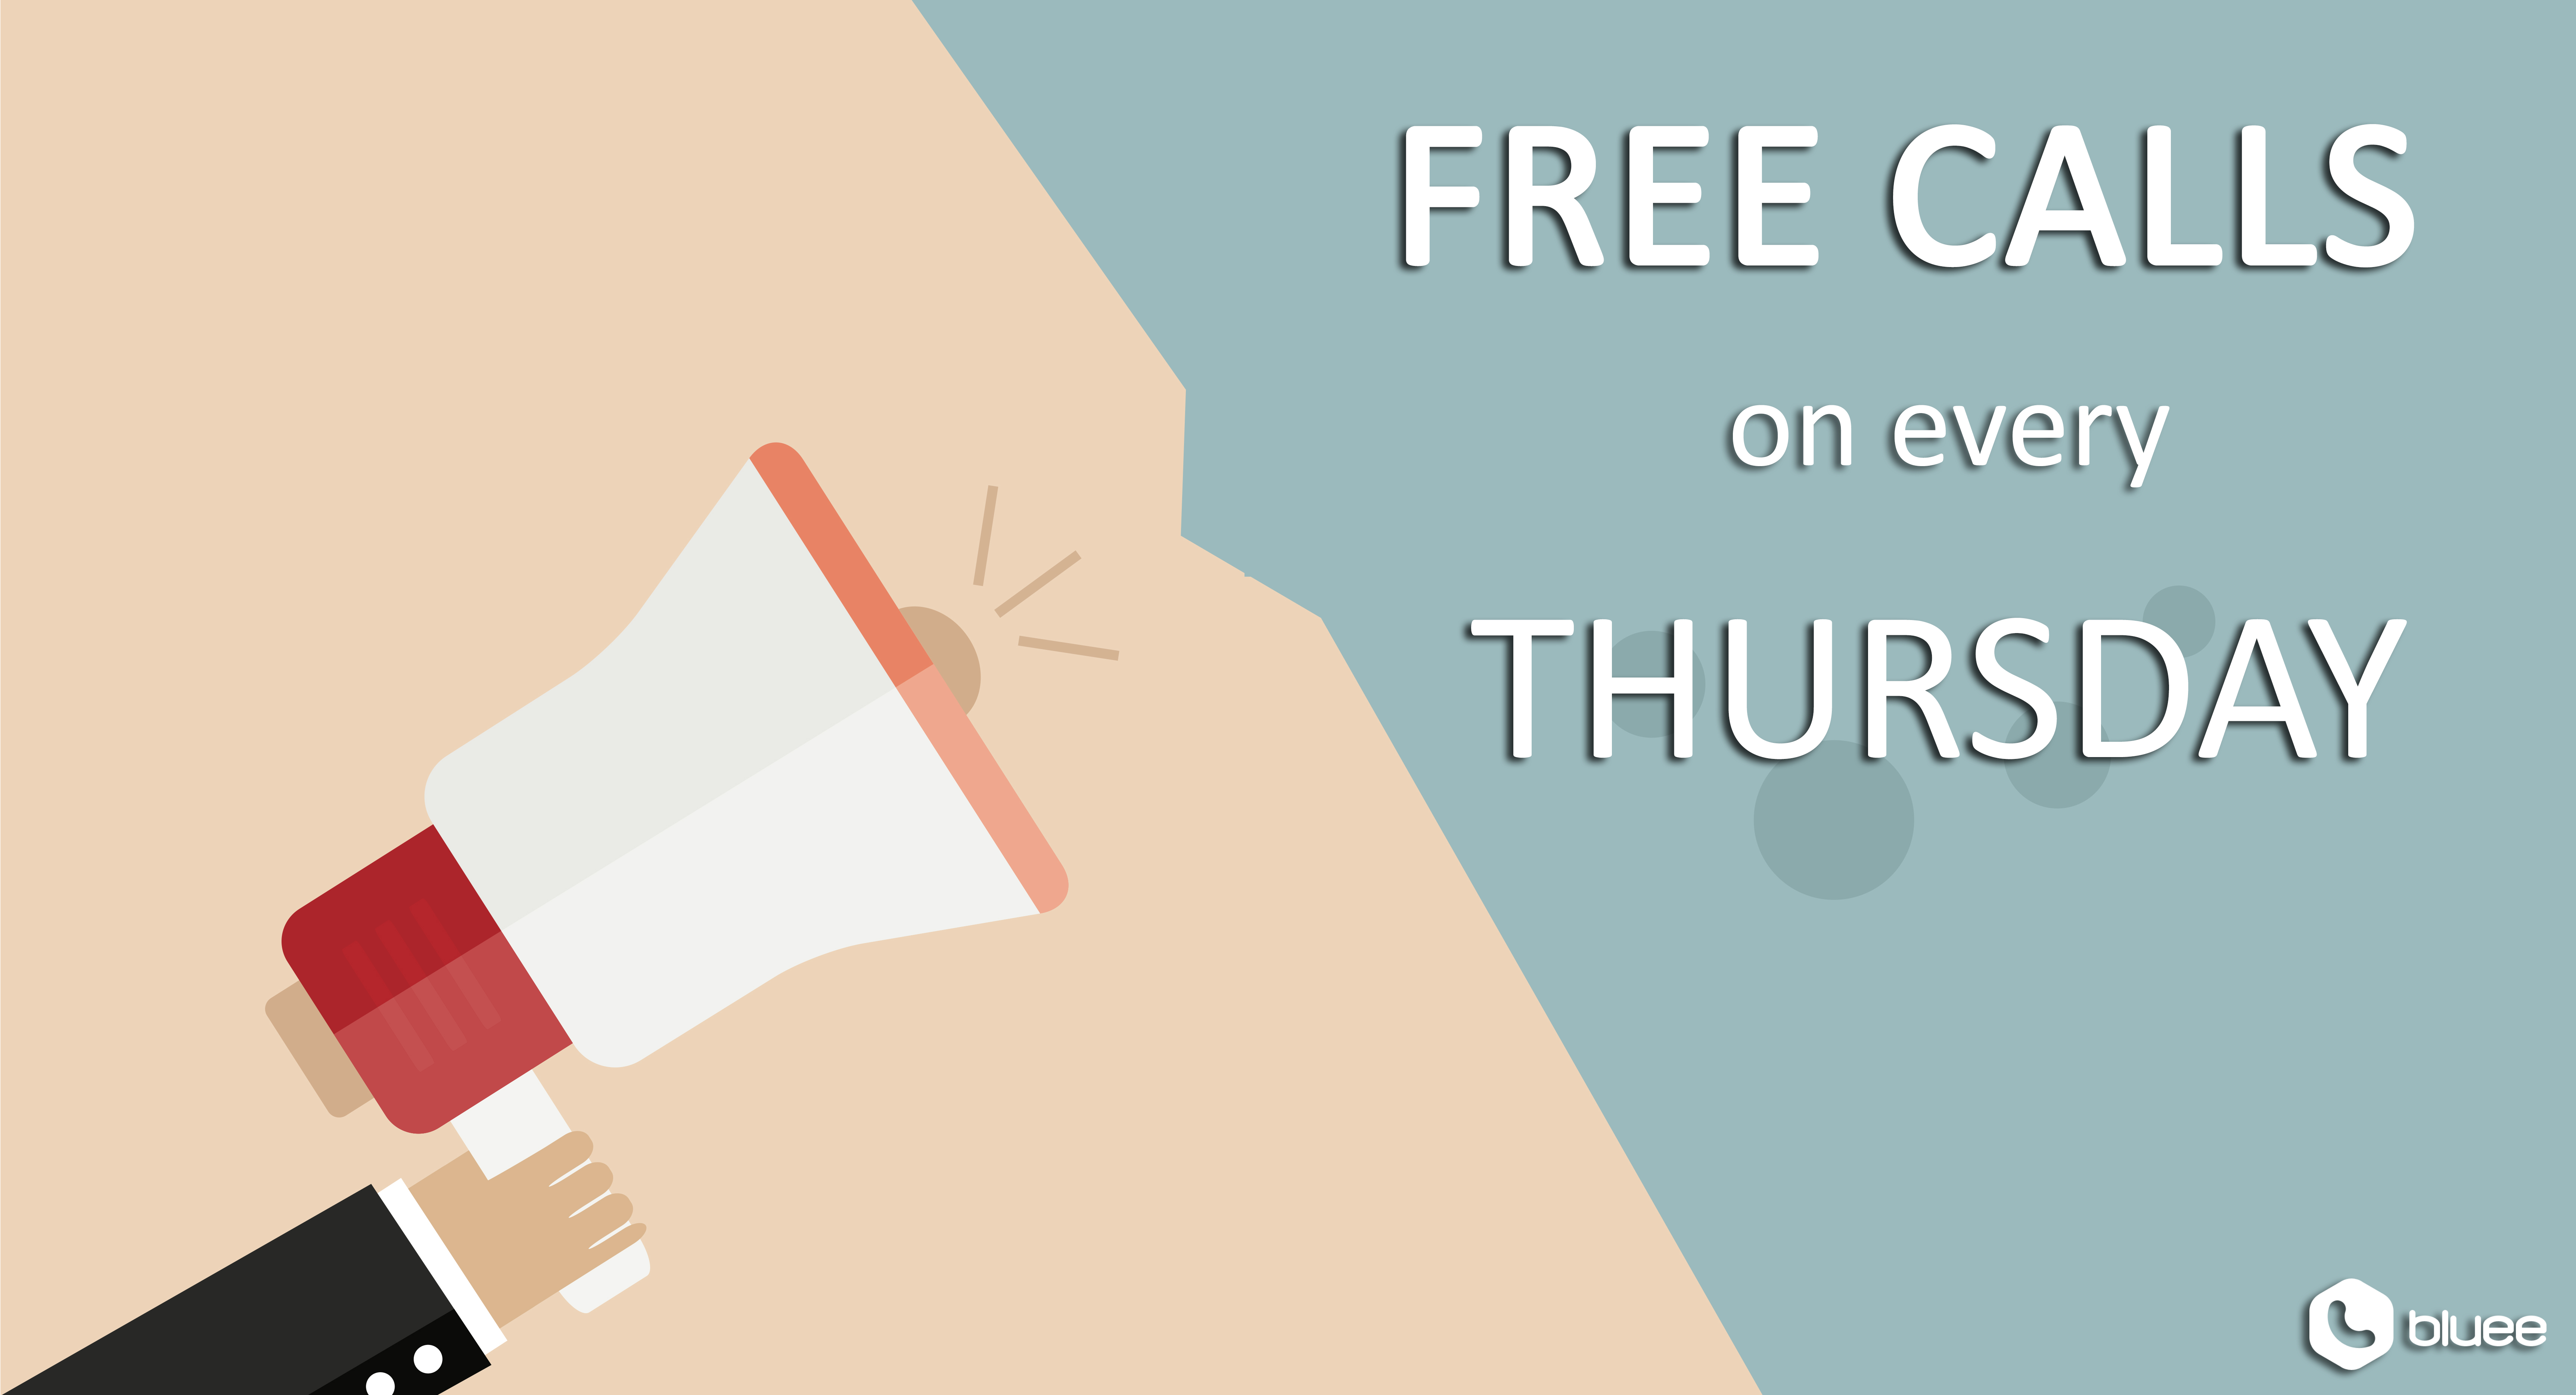 FREE Calls on EVERY Thursday!